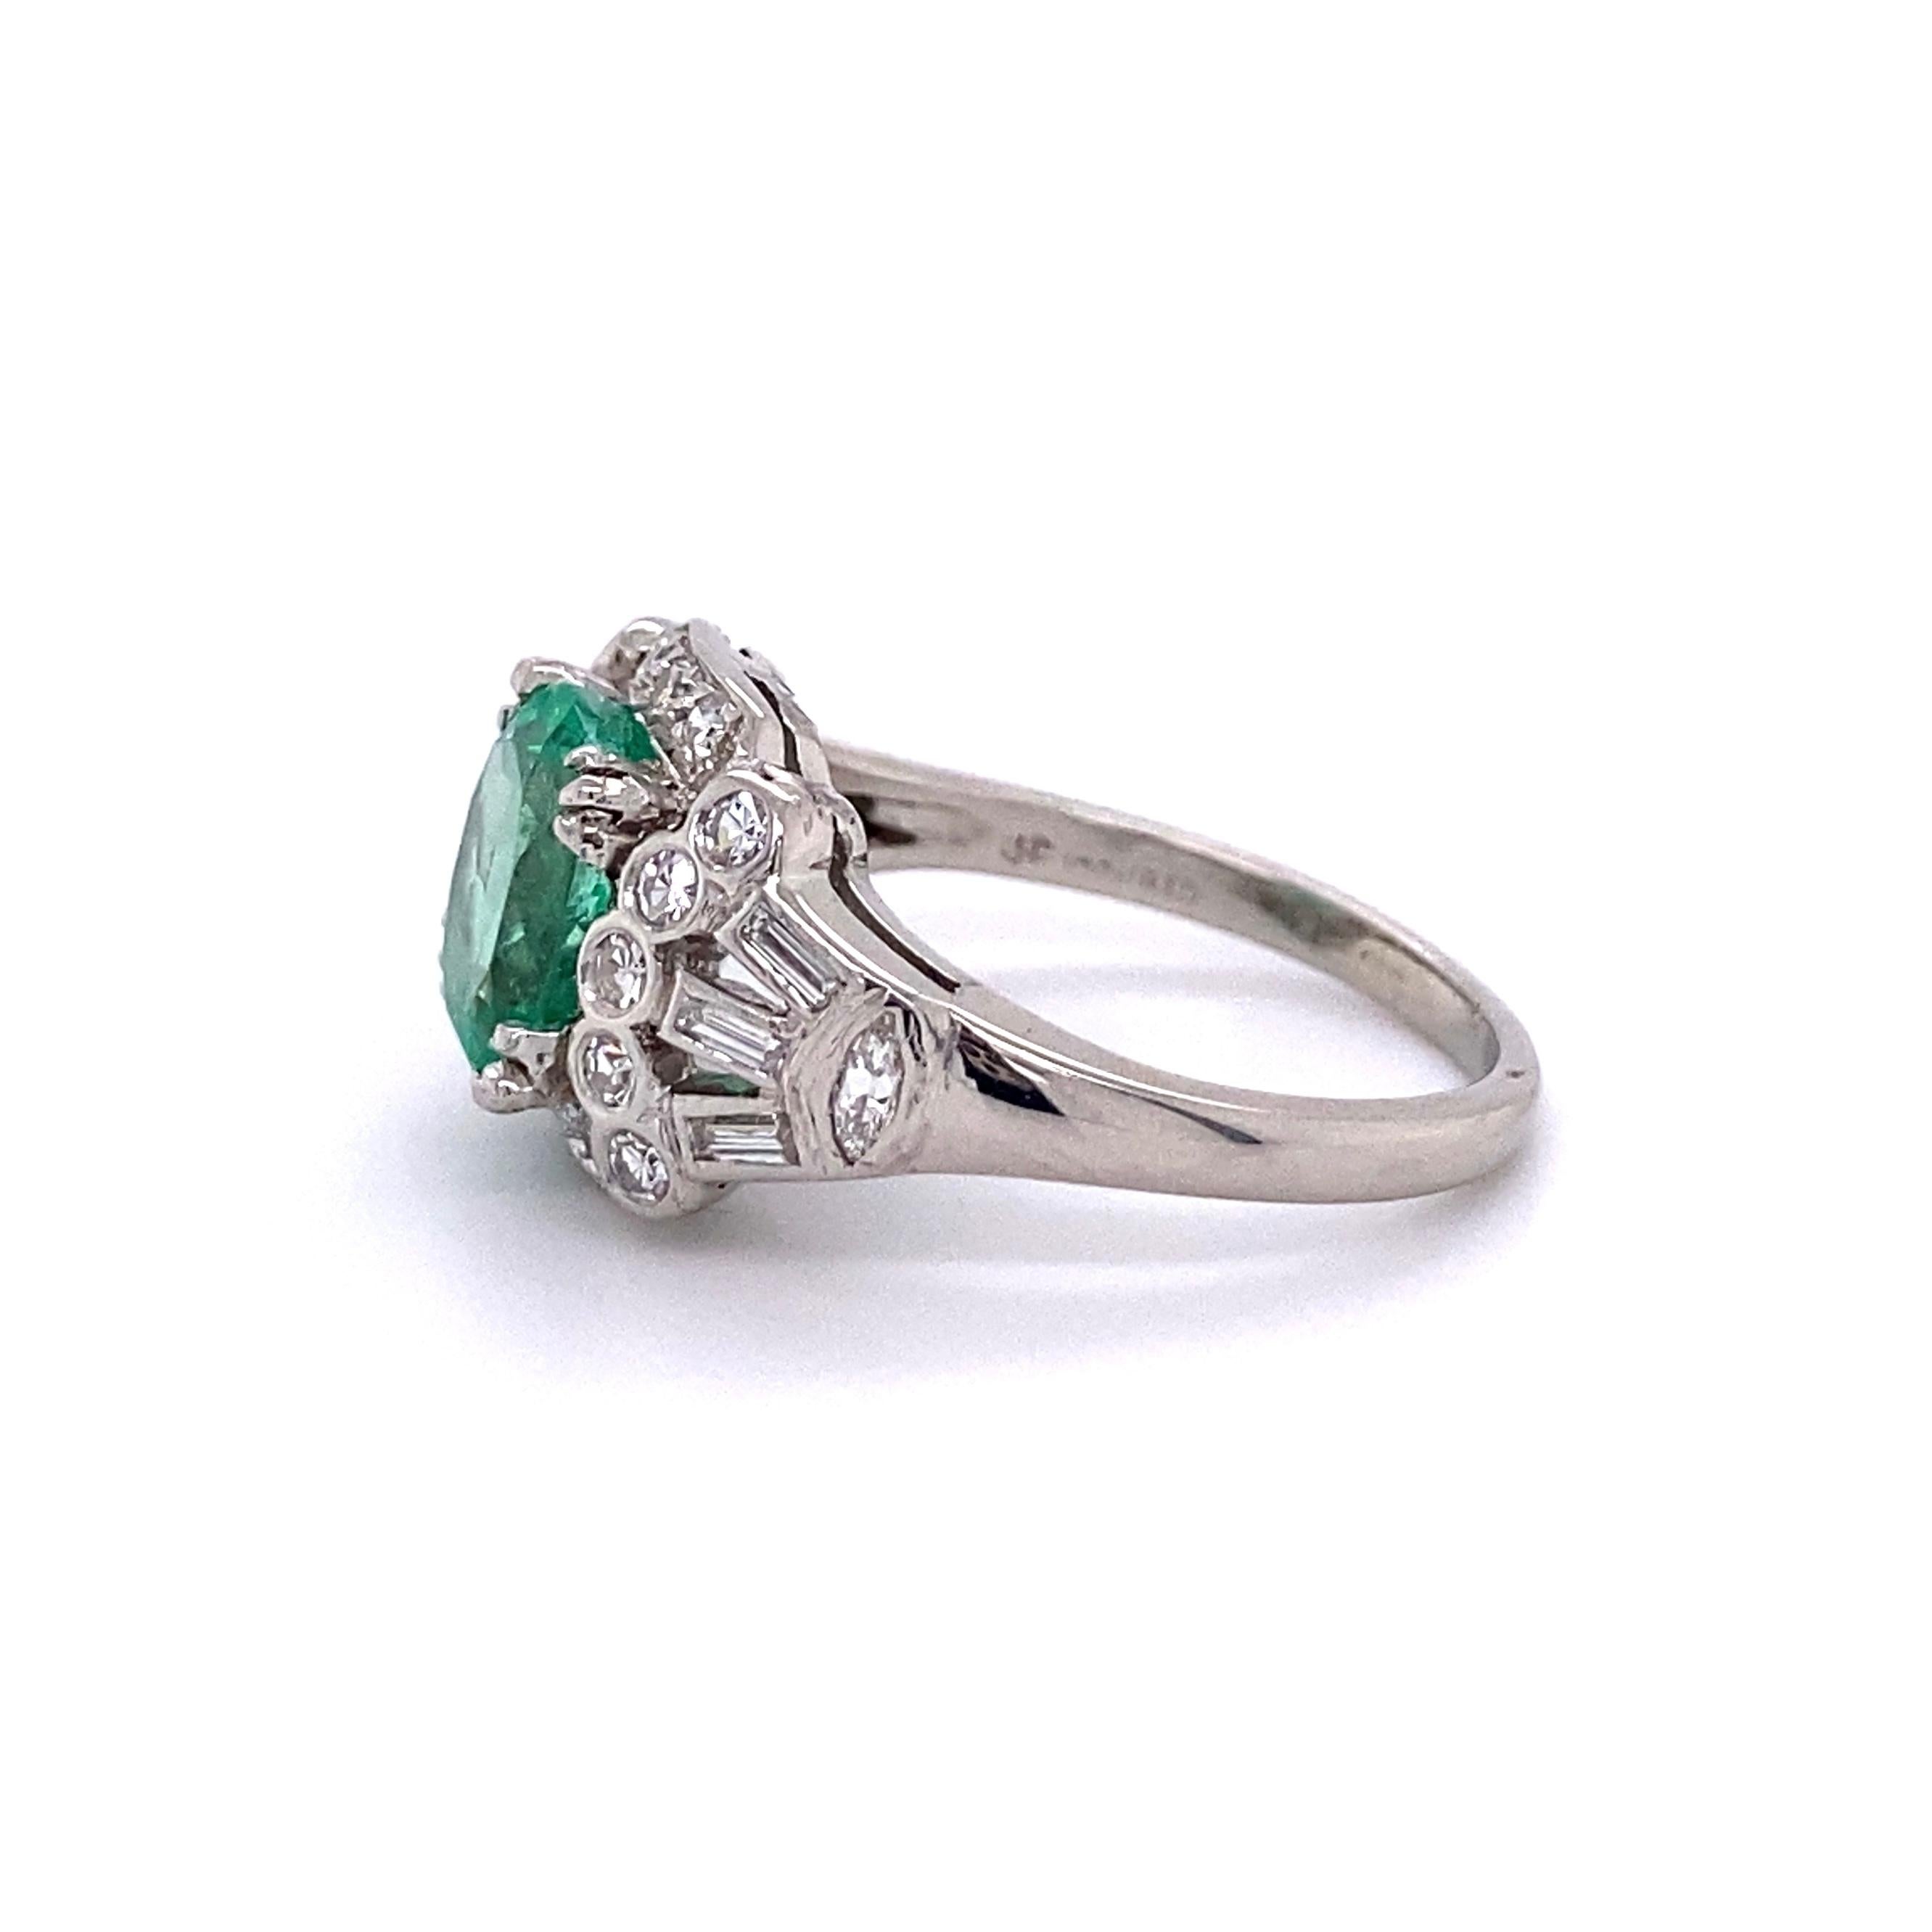 2.15 Carat Emerald and Diamond Platinum Cocktail Ring Estate Fine Jewelry In Excellent Condition For Sale In Montreal, QC